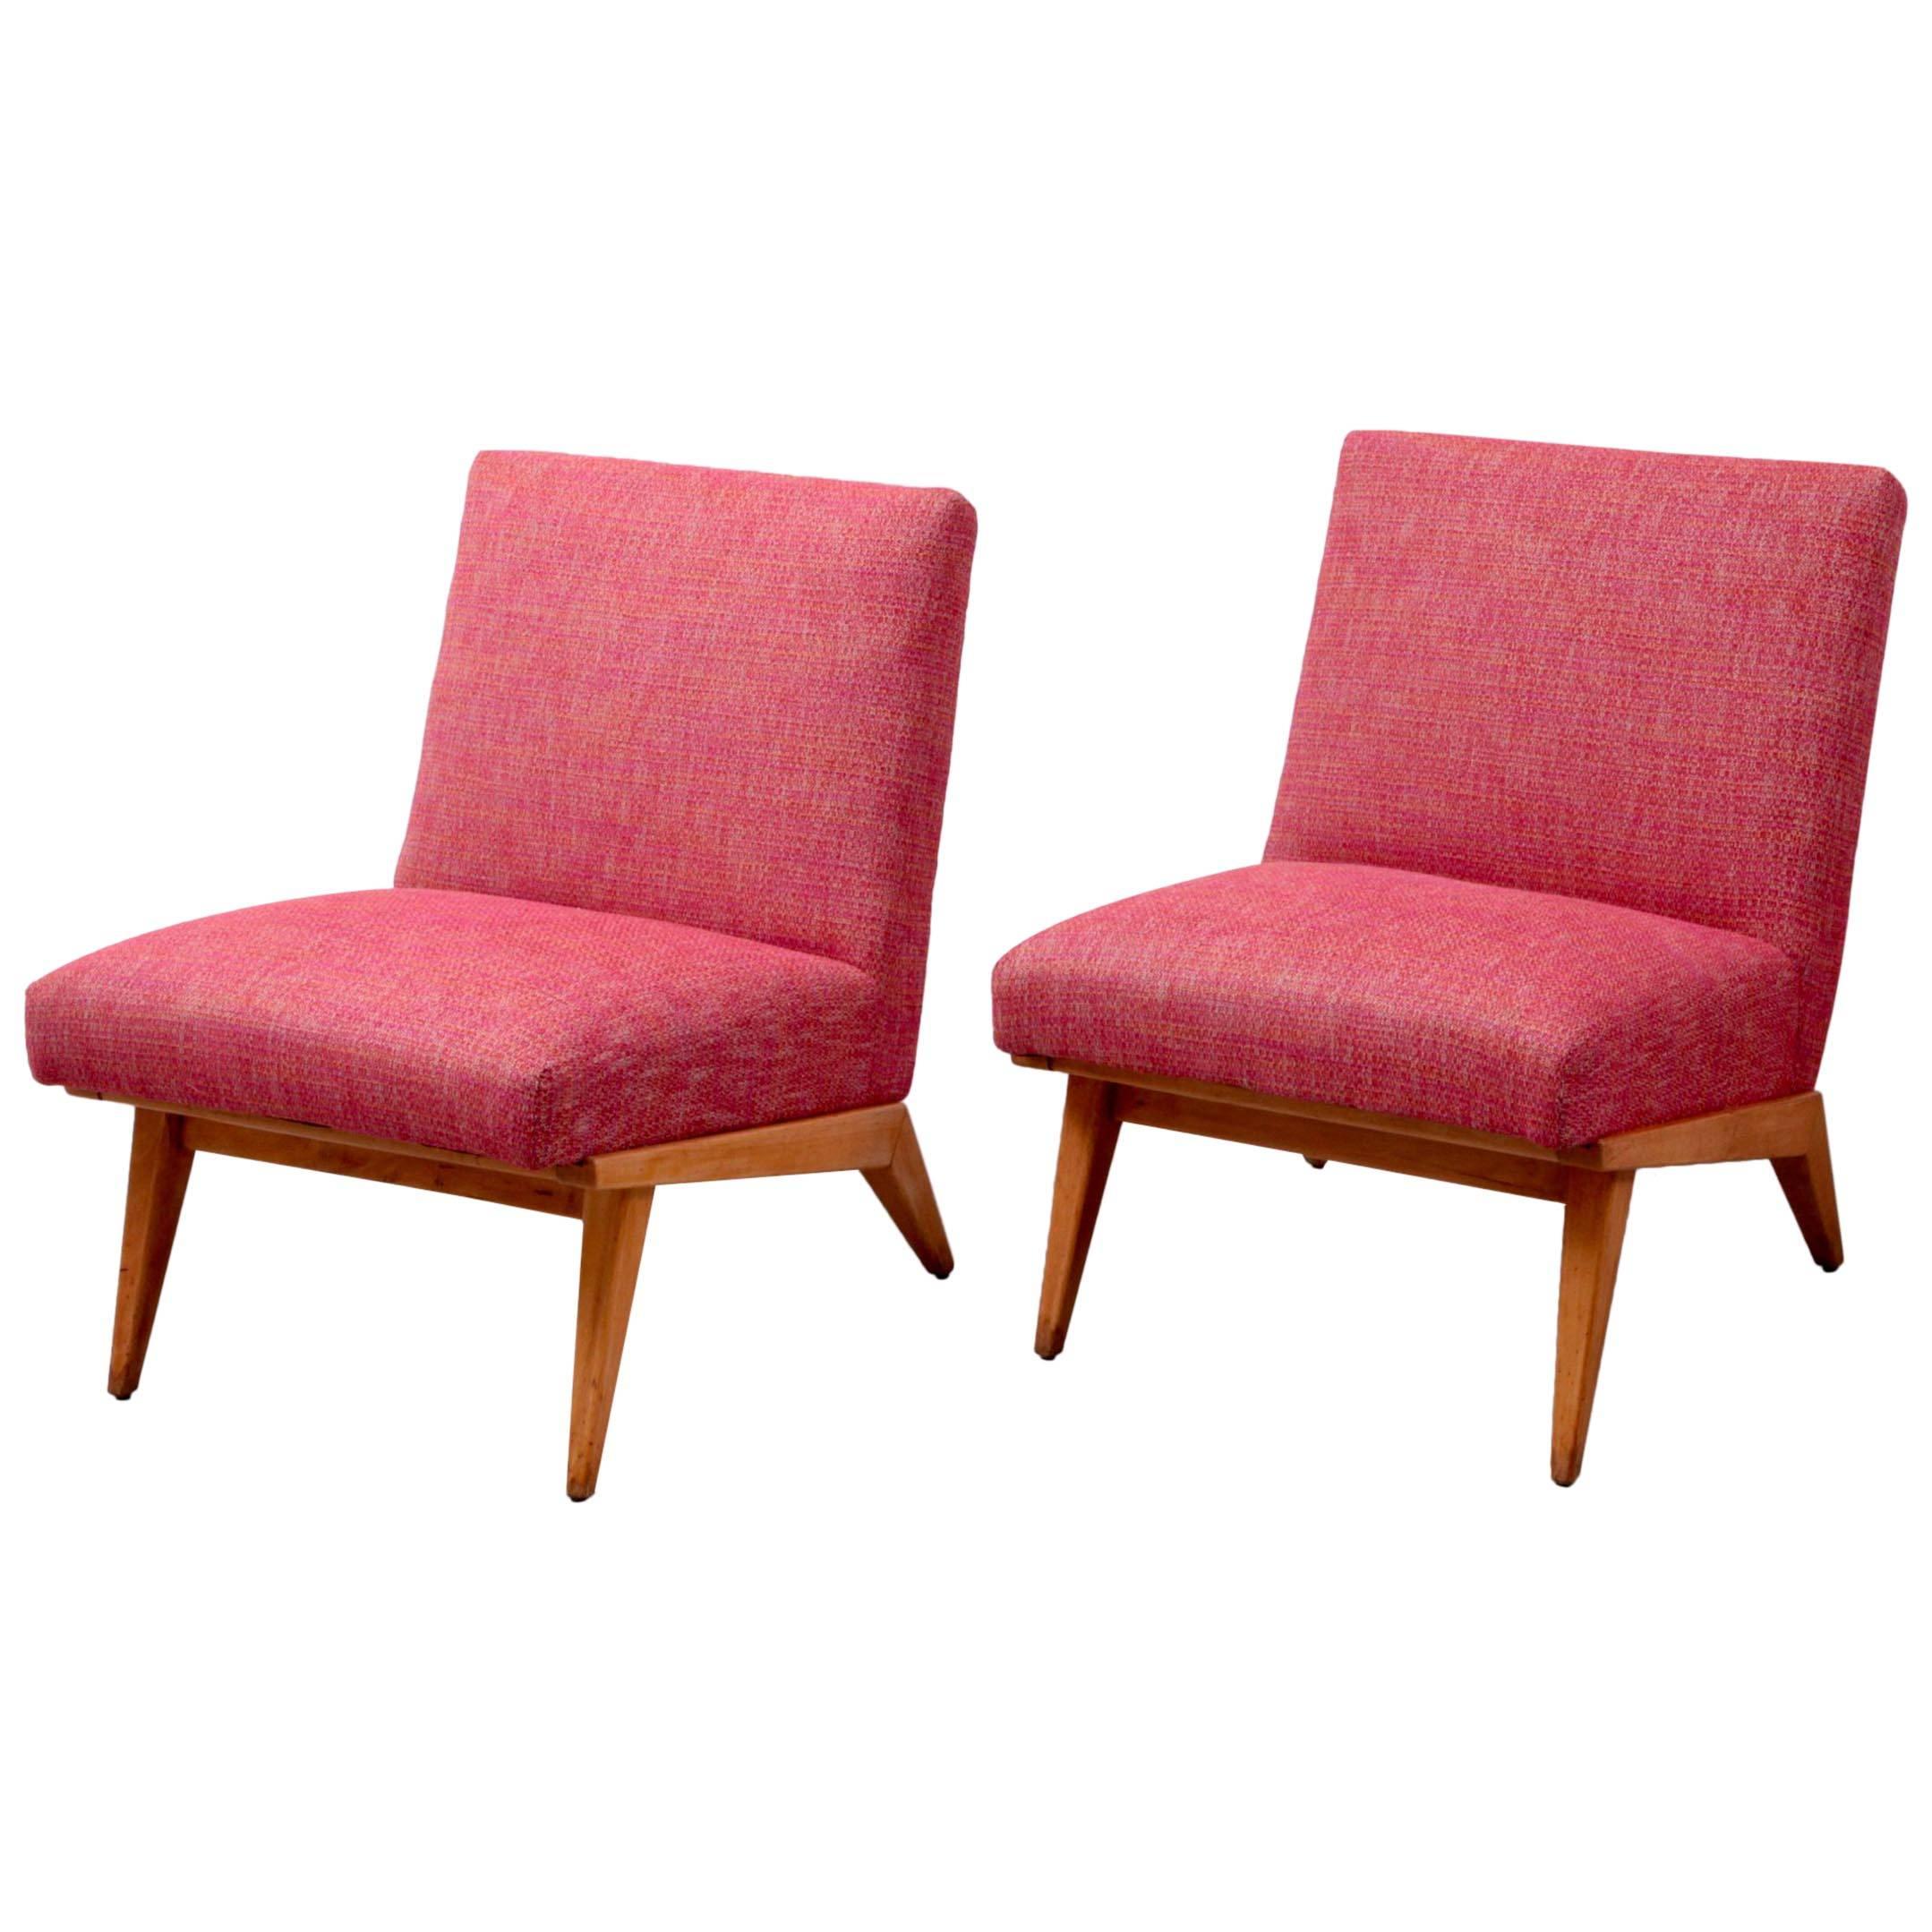 Pair of Jens Risom 21 Chair 1940s USA for Knoll Associates